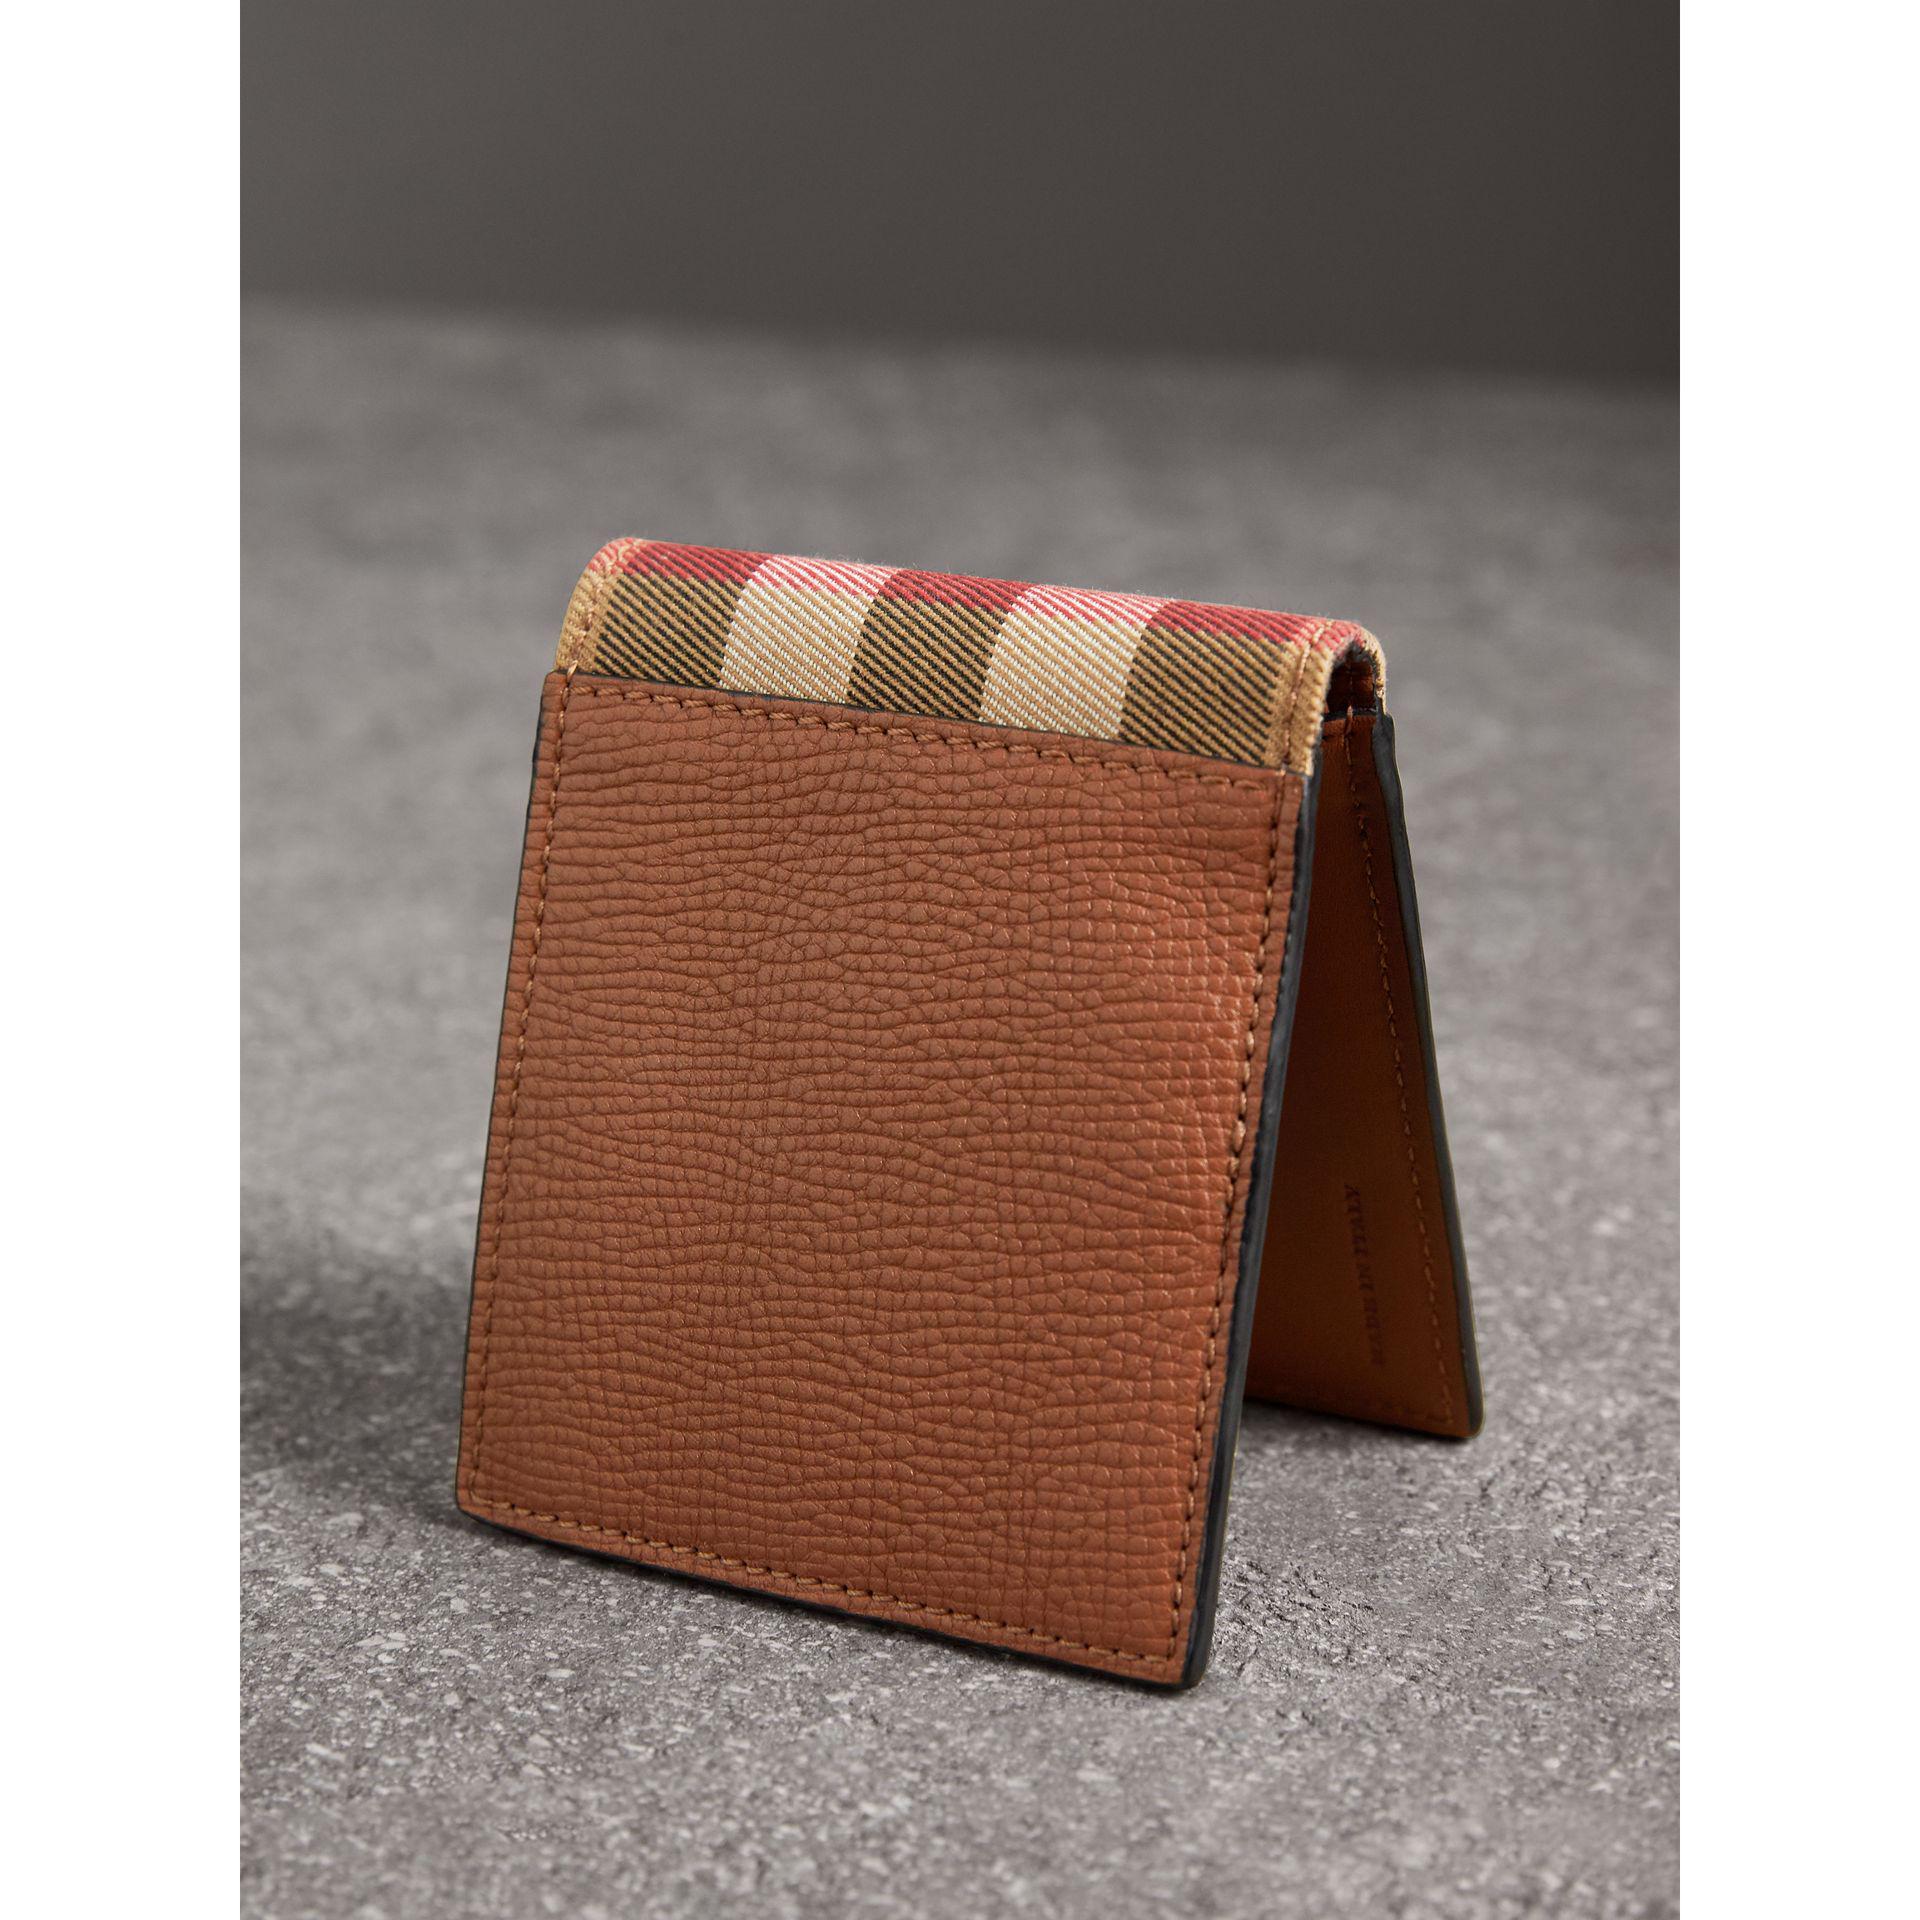 Burberry Leather And House Check International Bifold Wallet in